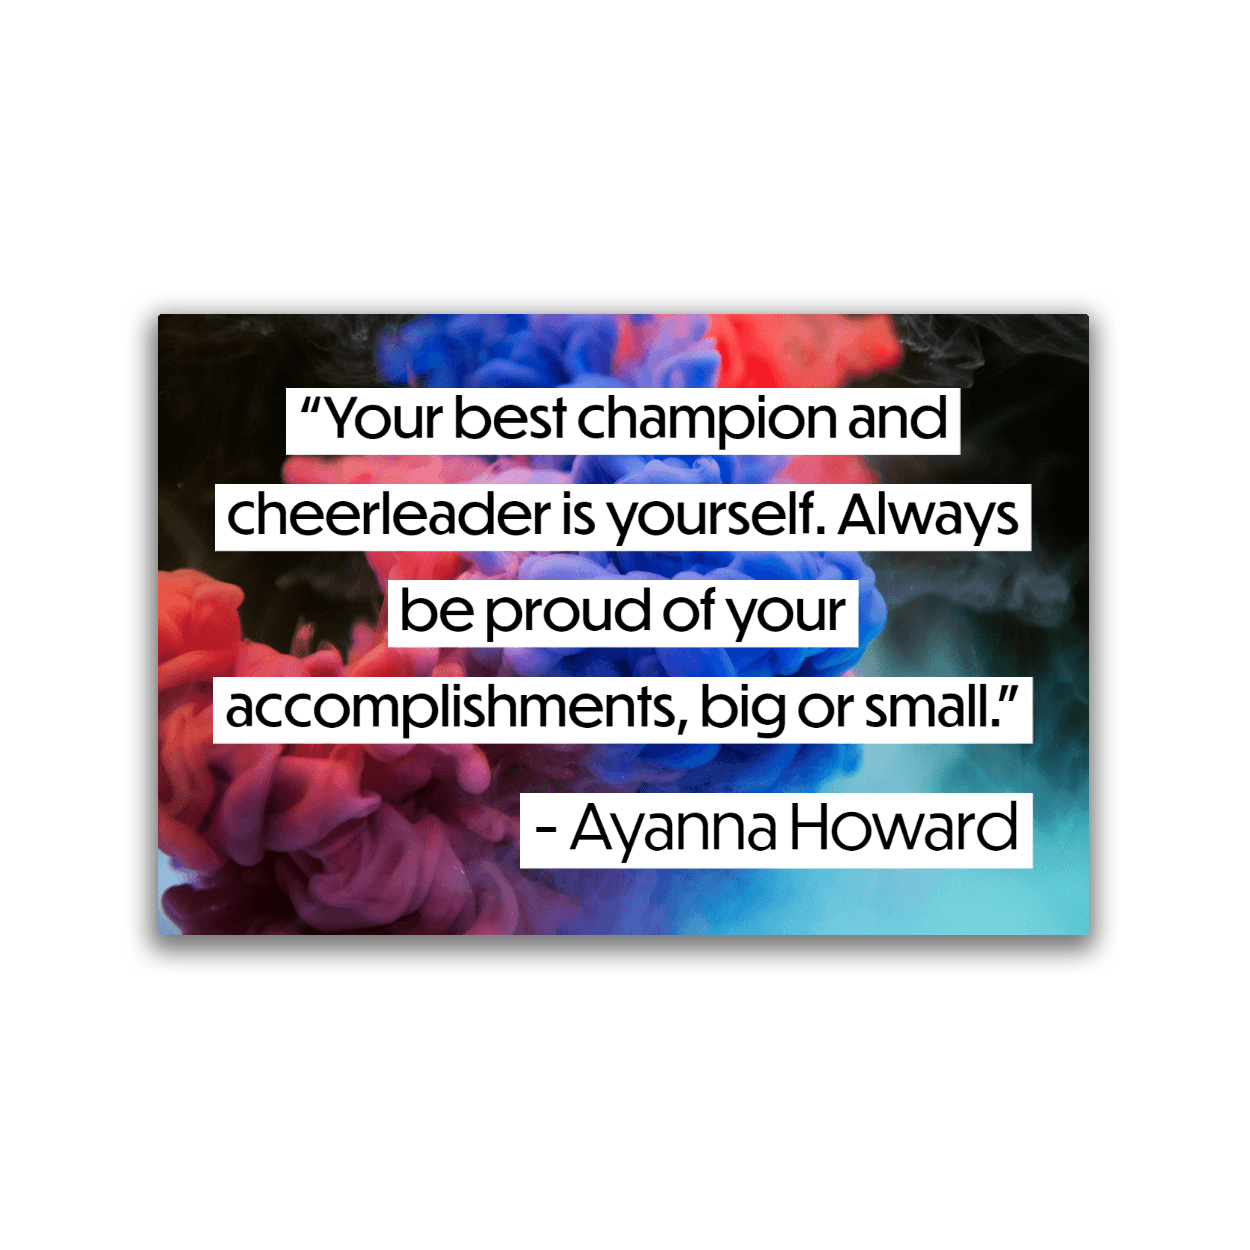 Image of a 2x3 magnet with an Ayanna Howard quote